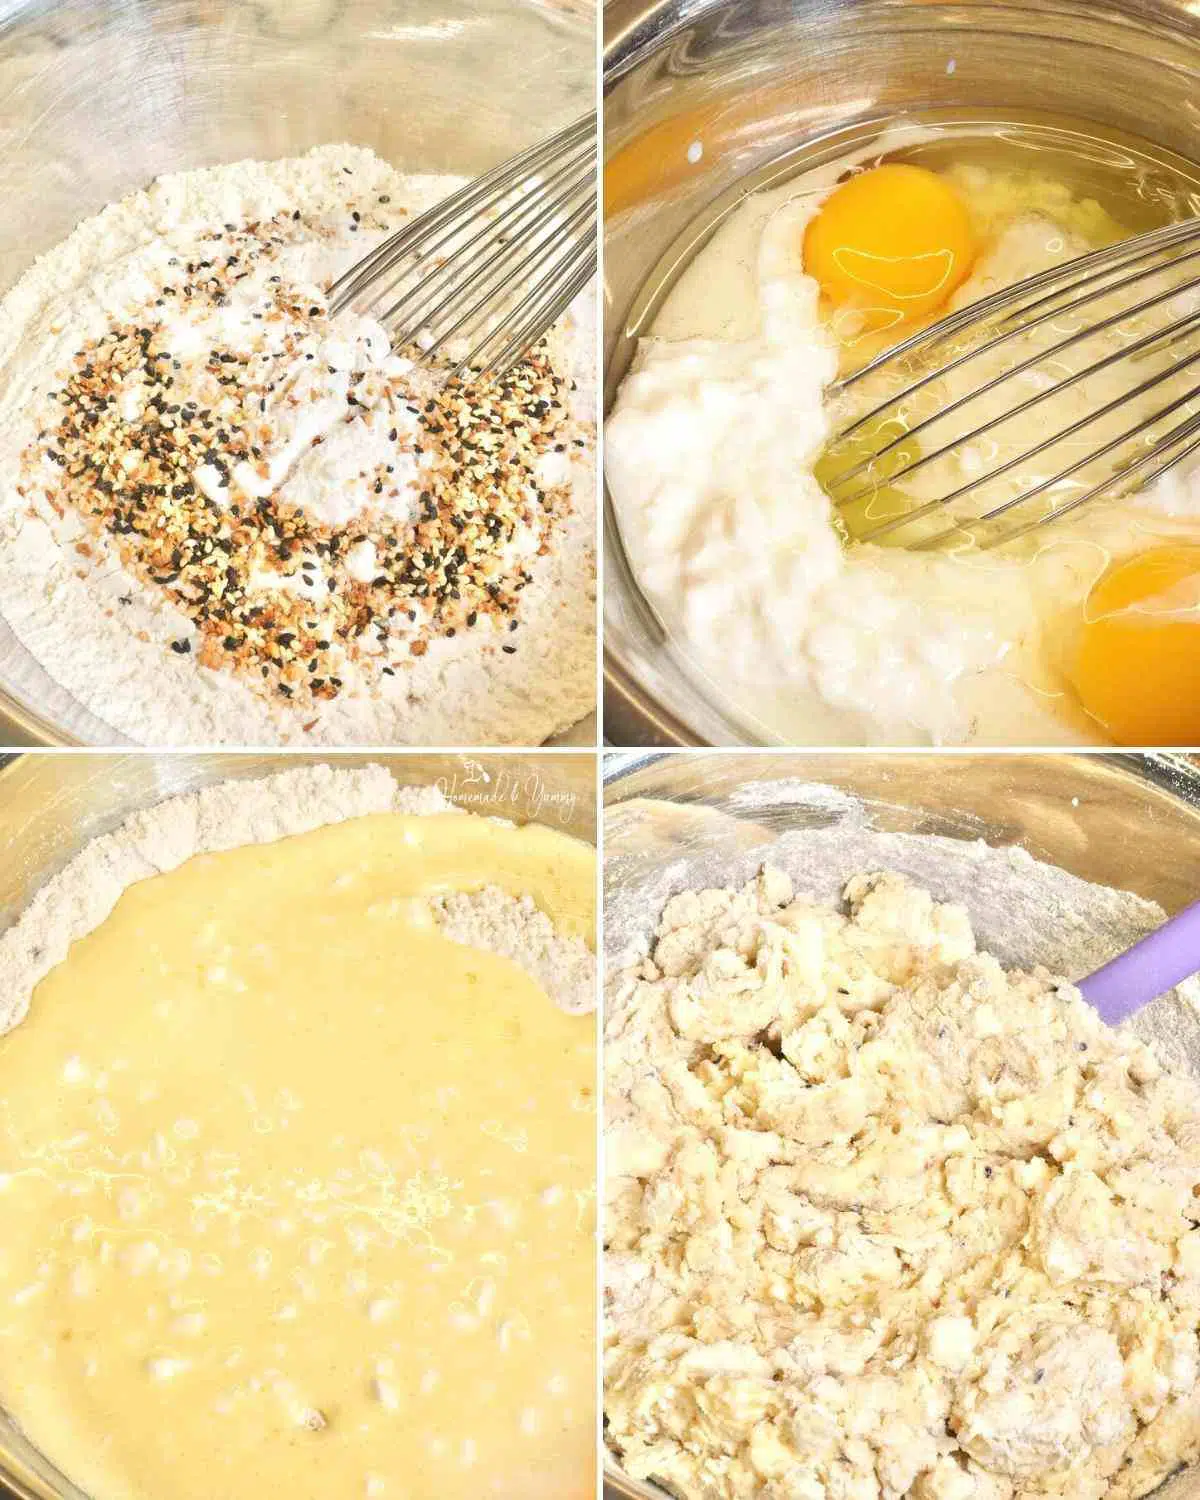 Steps in mixing the wet and dry biscuit ingredients.